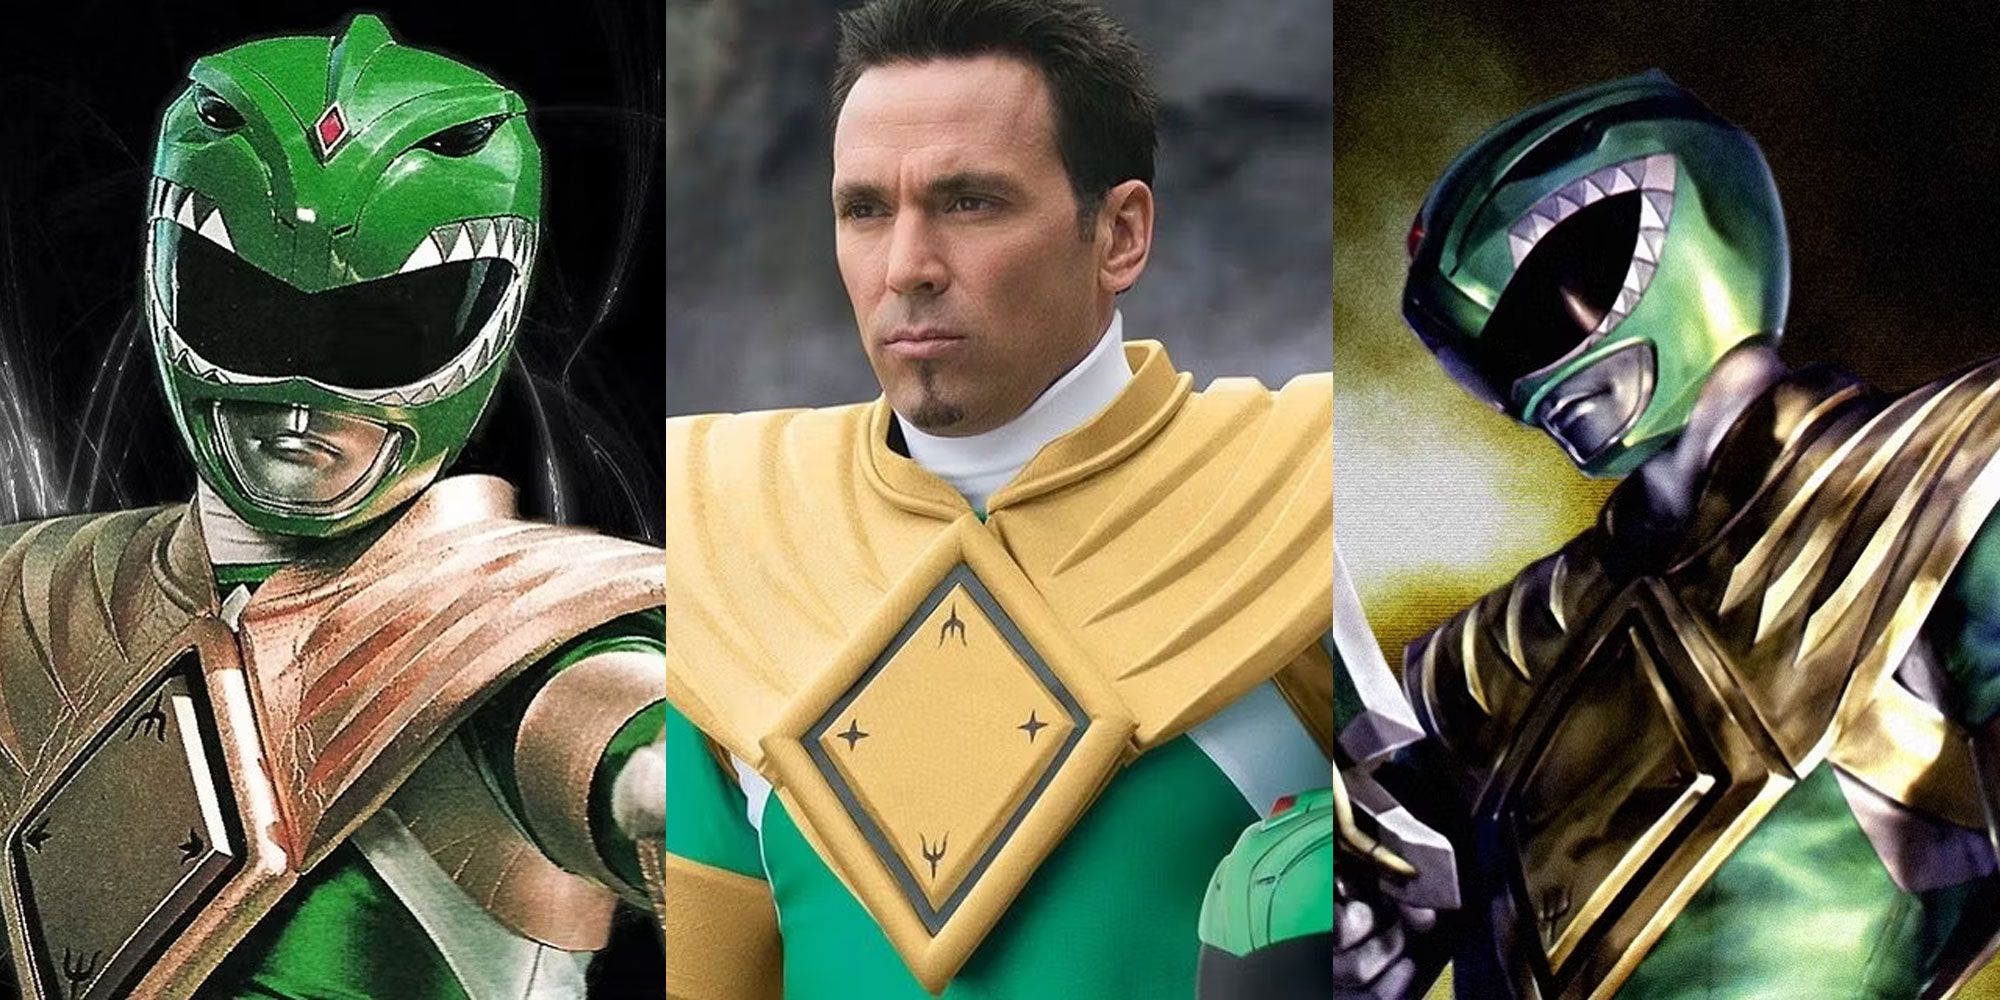 A split image features the original Green Mighty Morphin Power Ranger, Jason David Frank as Tommy Oliver in Super Megaforce, and the Green Ranger in Boom Studios comics